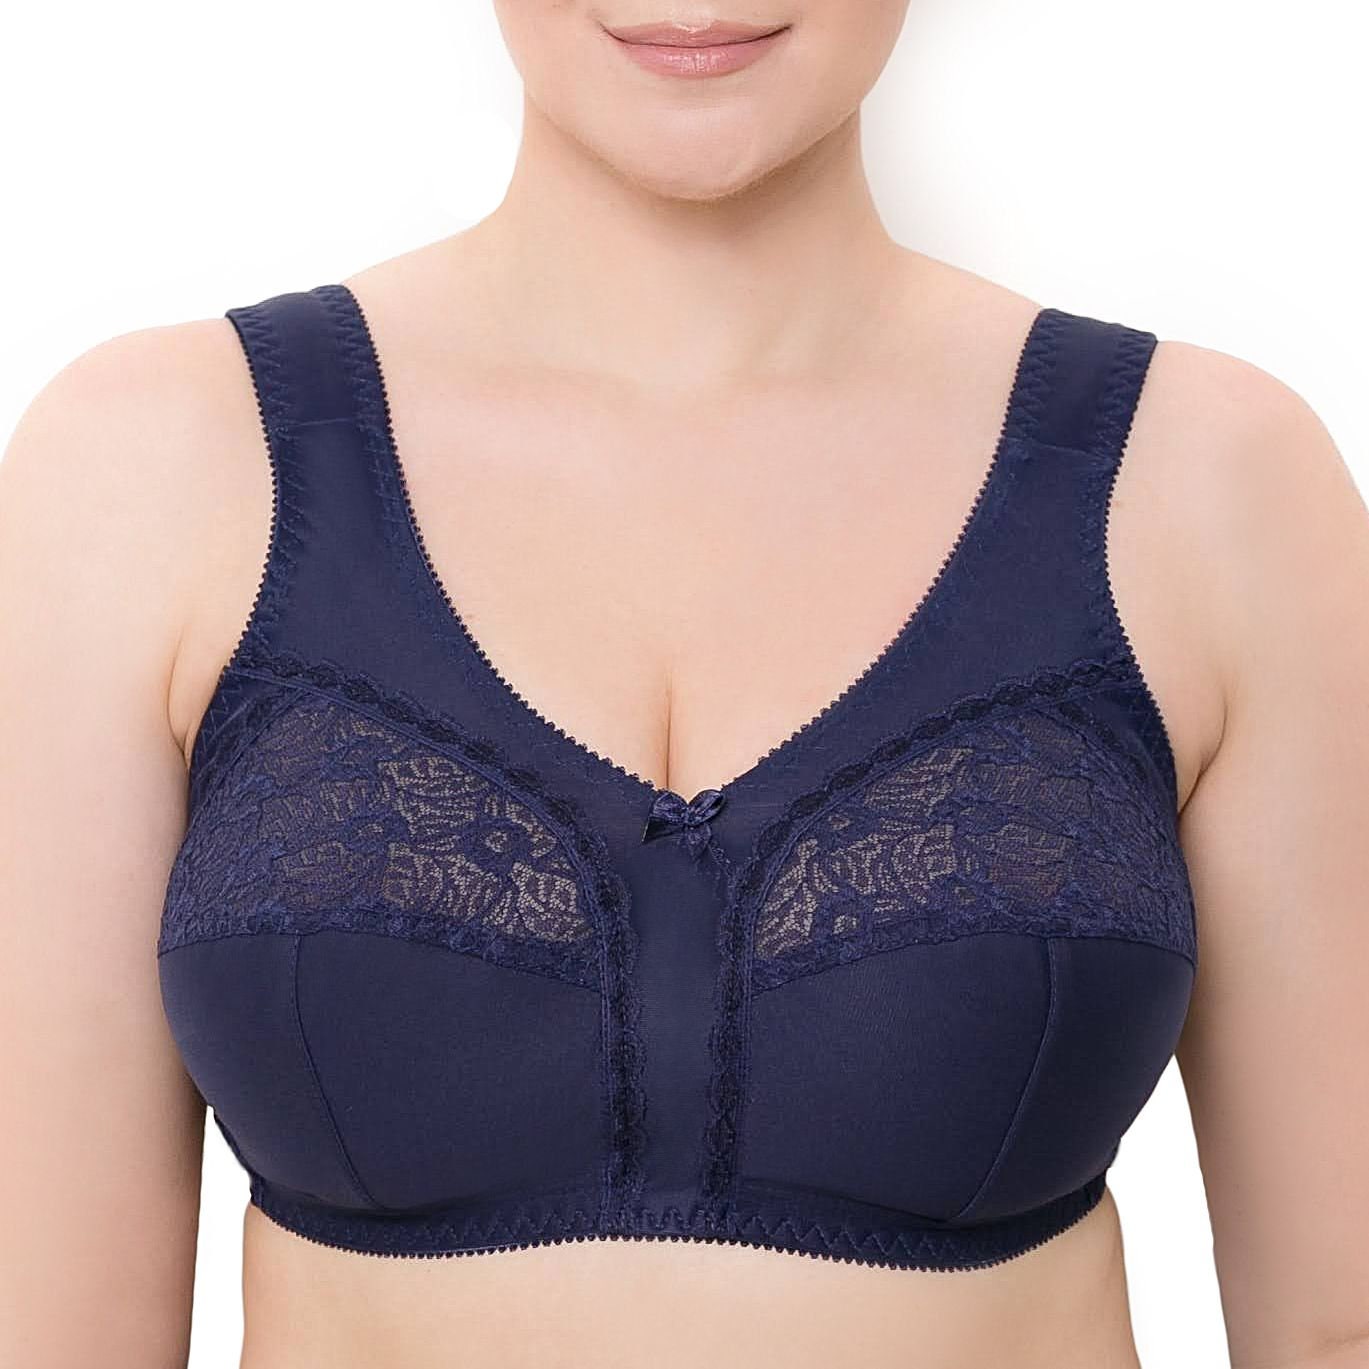 Buy Wireless Plus Size Bra Minimizer Wide Straps Unlined Full Coverage 36  38 40 42 44 46 48 50 52/C D E F G H I J navy Online in India 